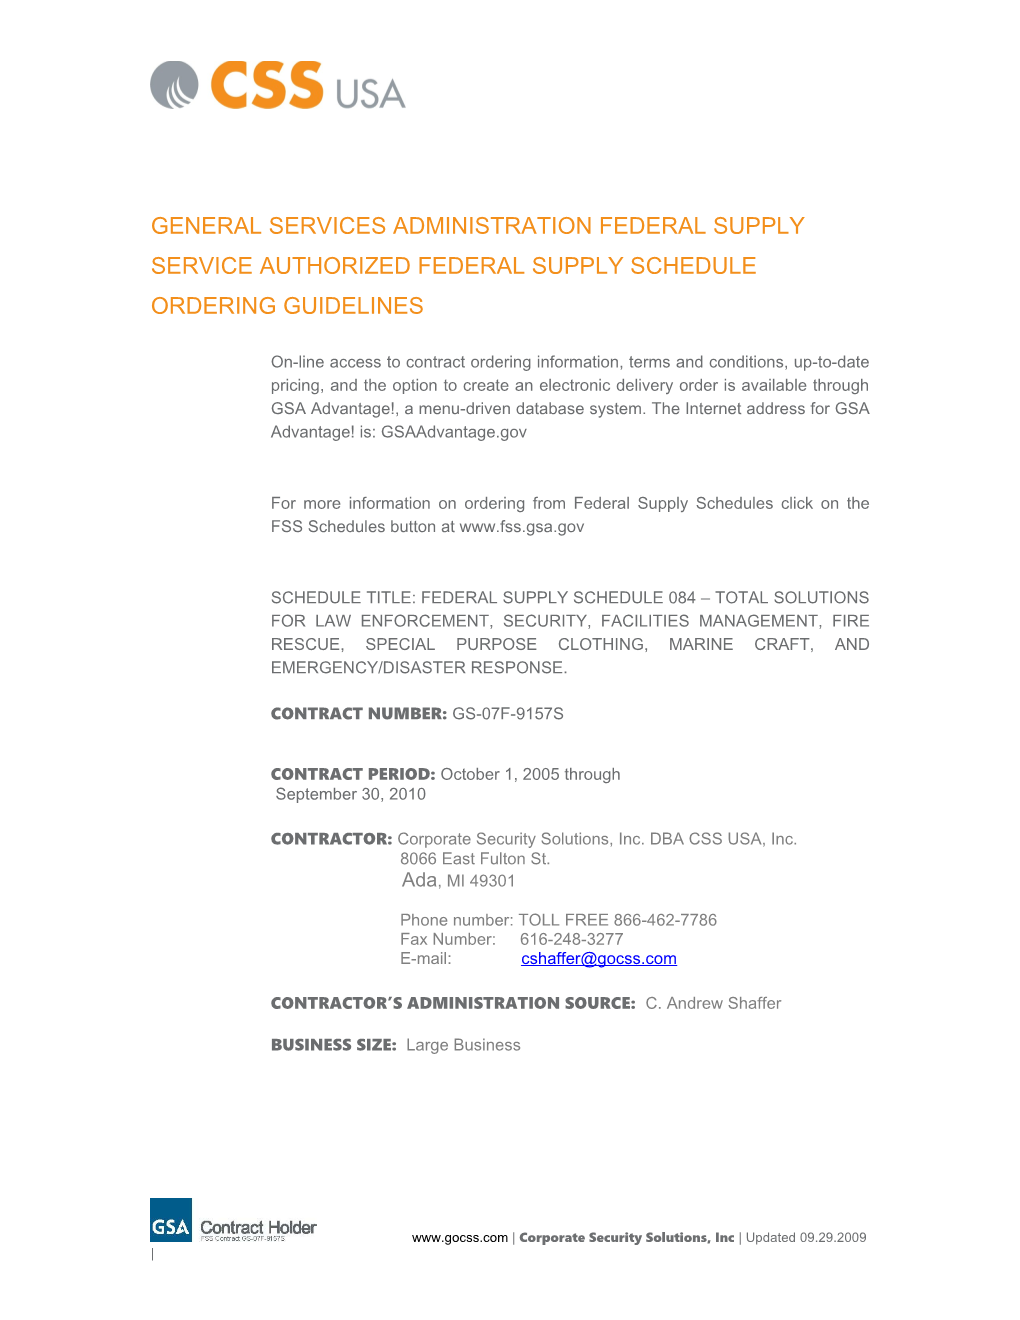 General Services Administration Federal Supply Service Authorized Federal Supply Schedule